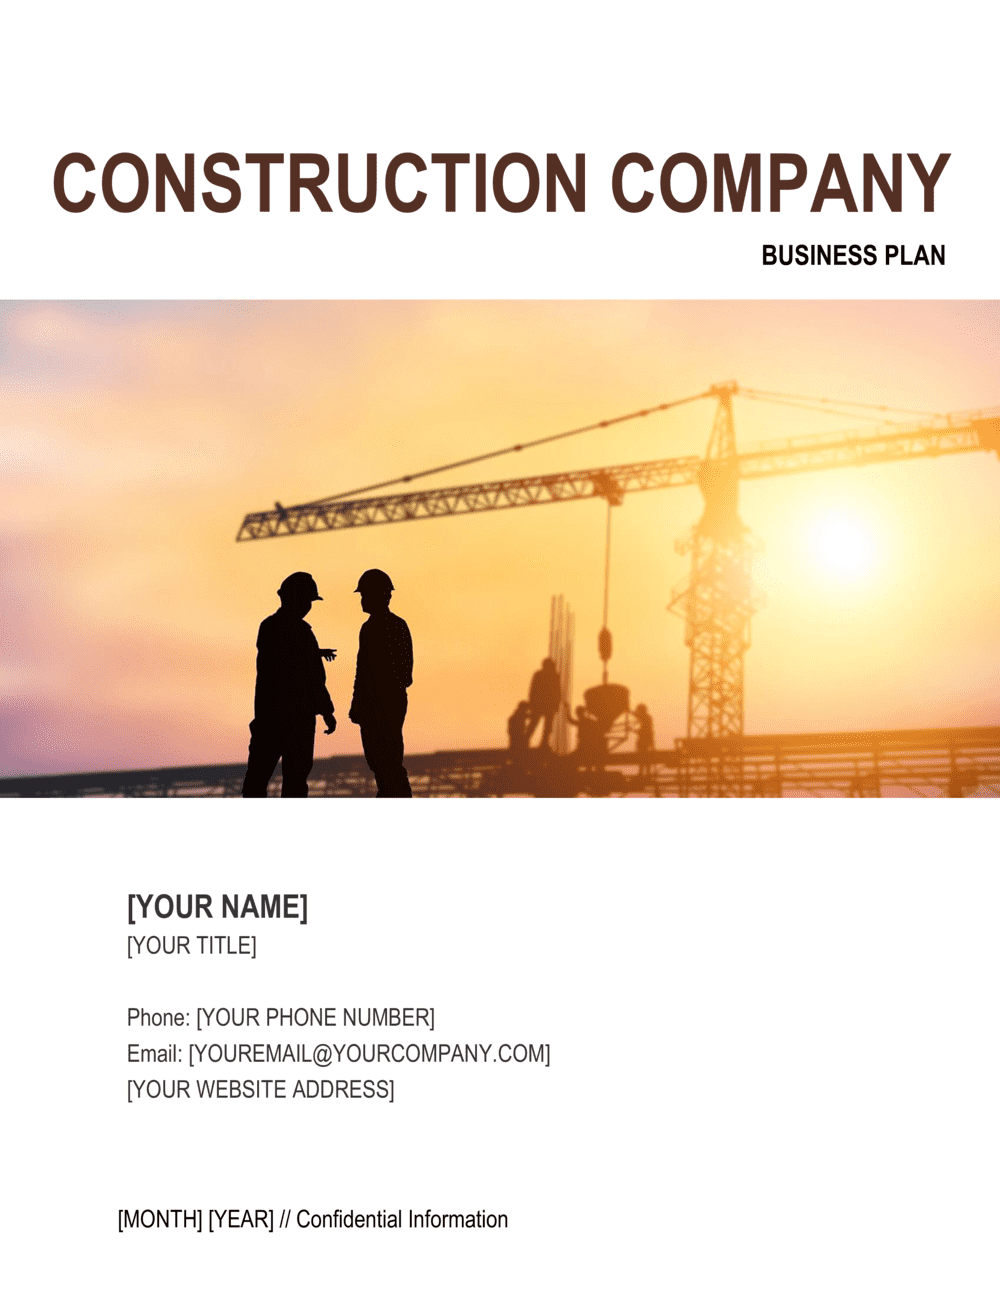 construction company business plan south africa